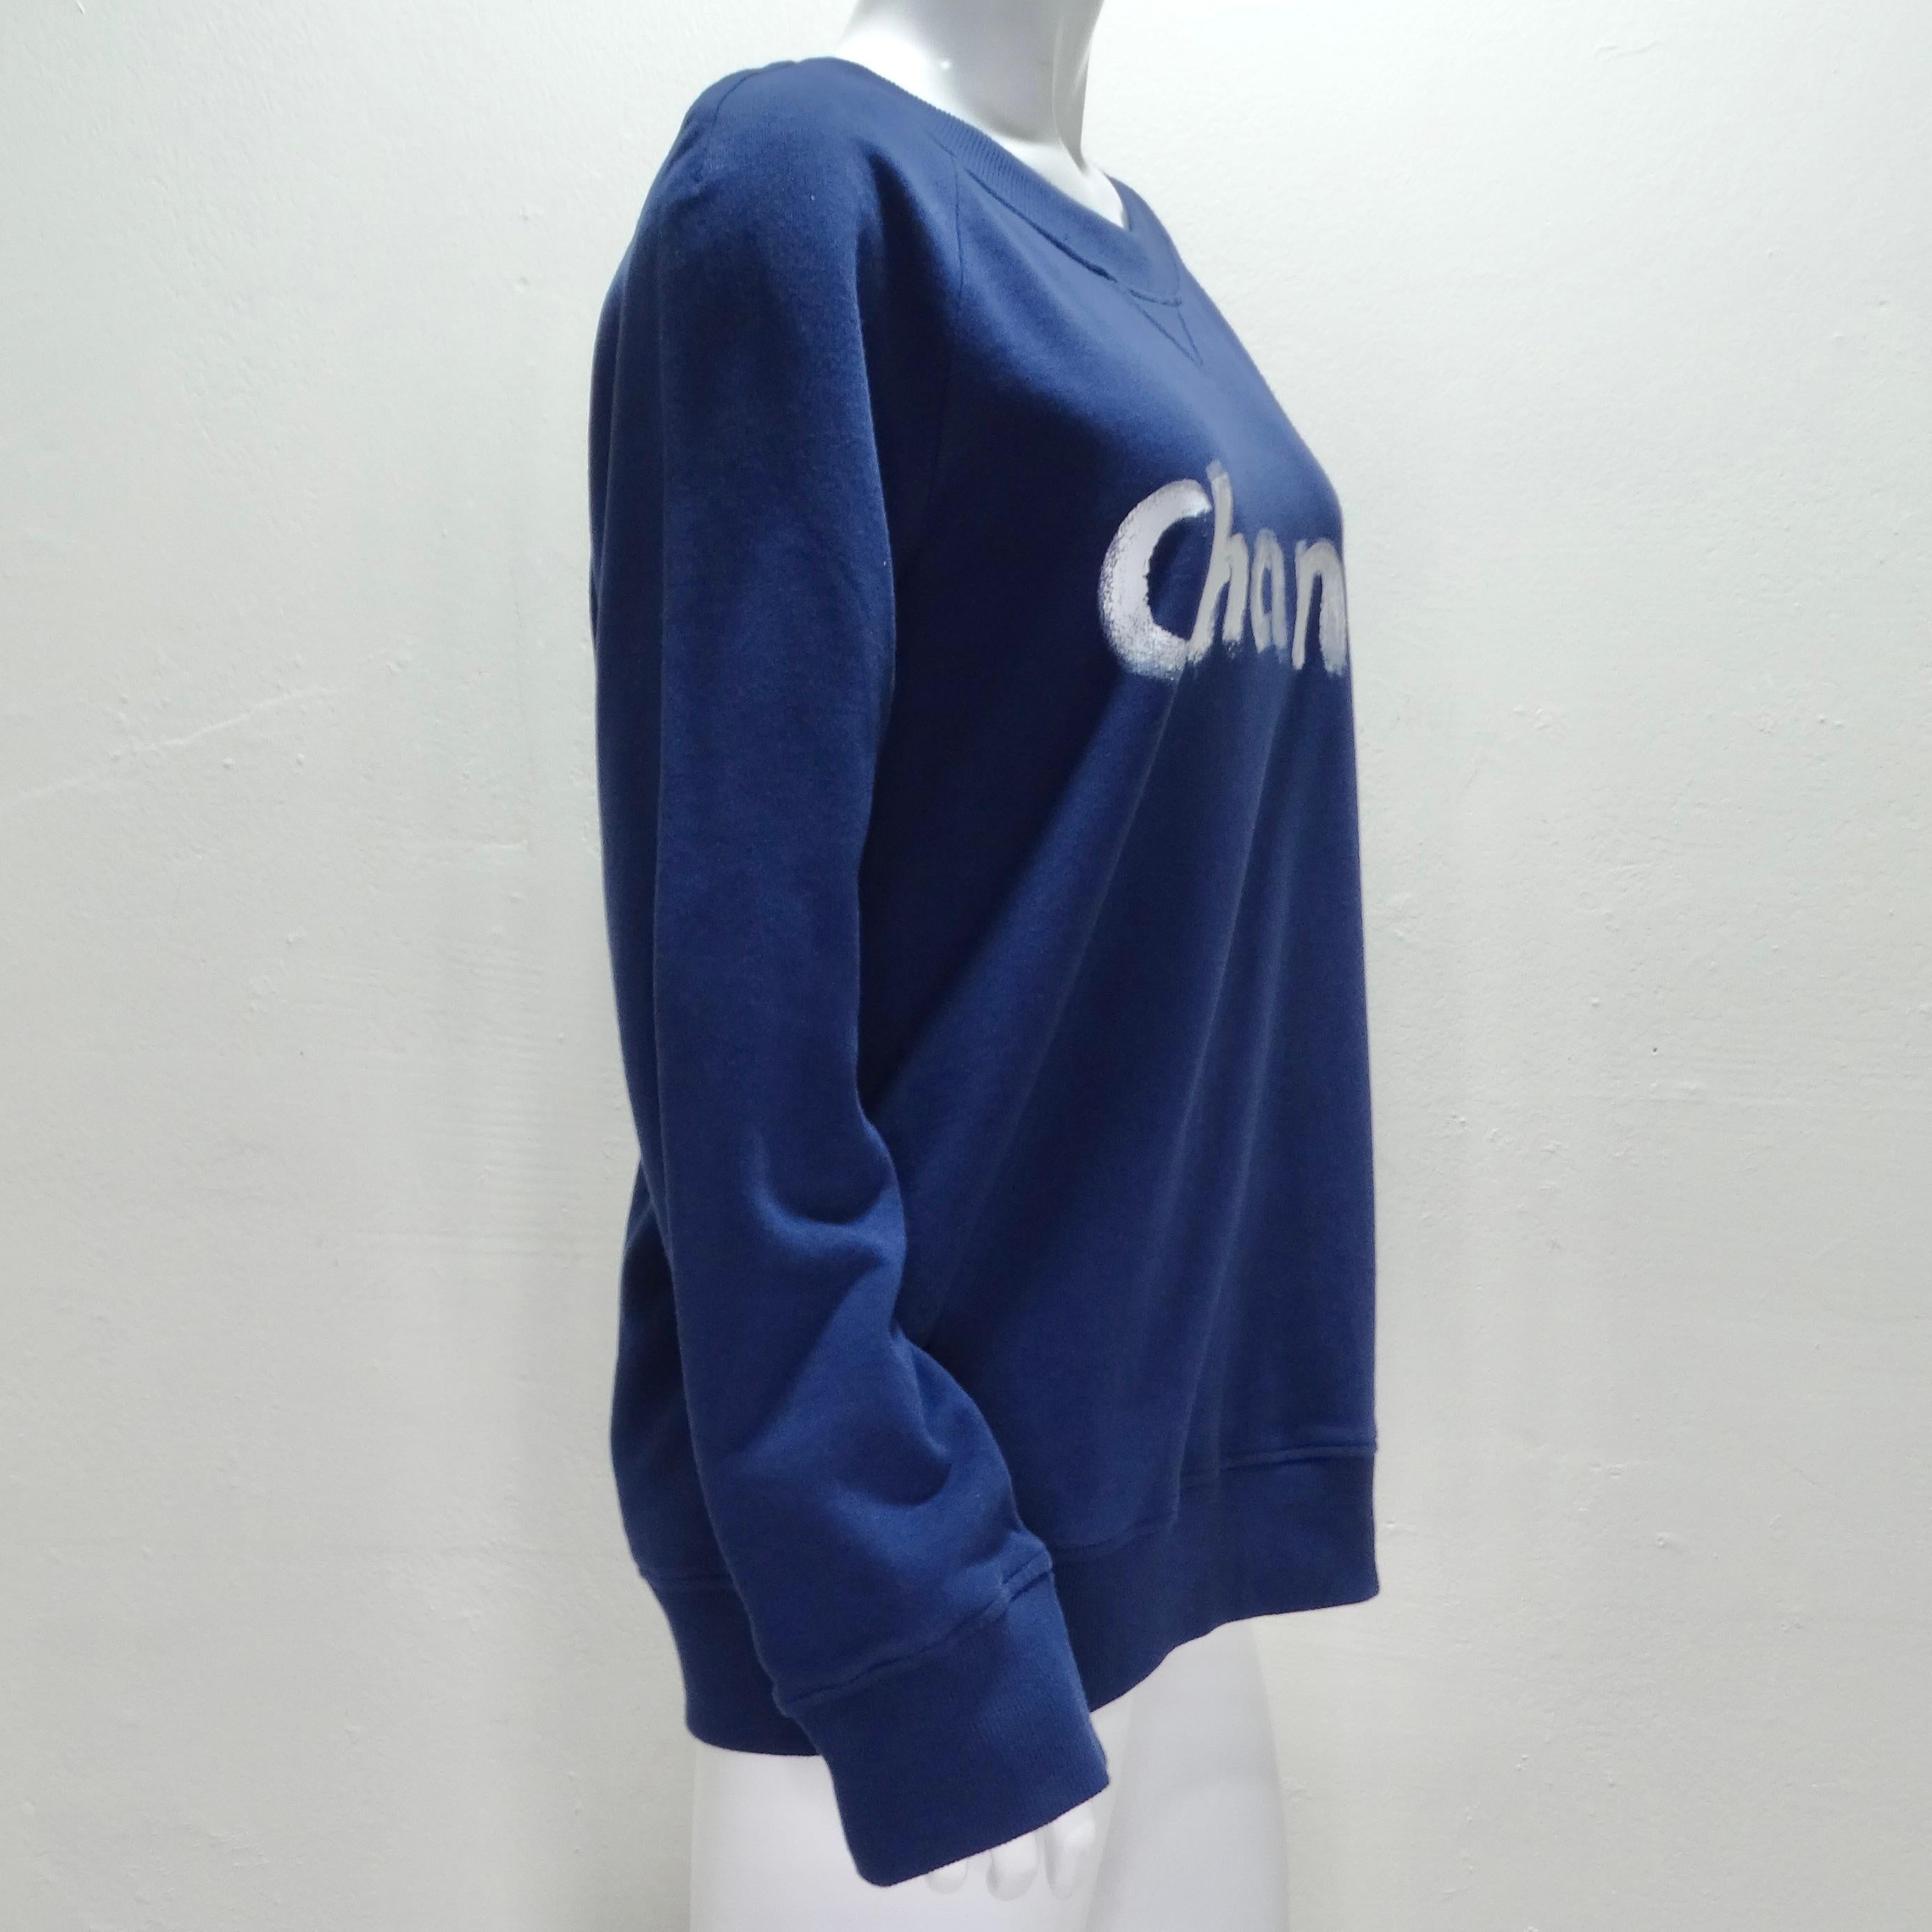 Chanel 2013 Limited Edition Navy Logo Sweatshirt For Sale 3